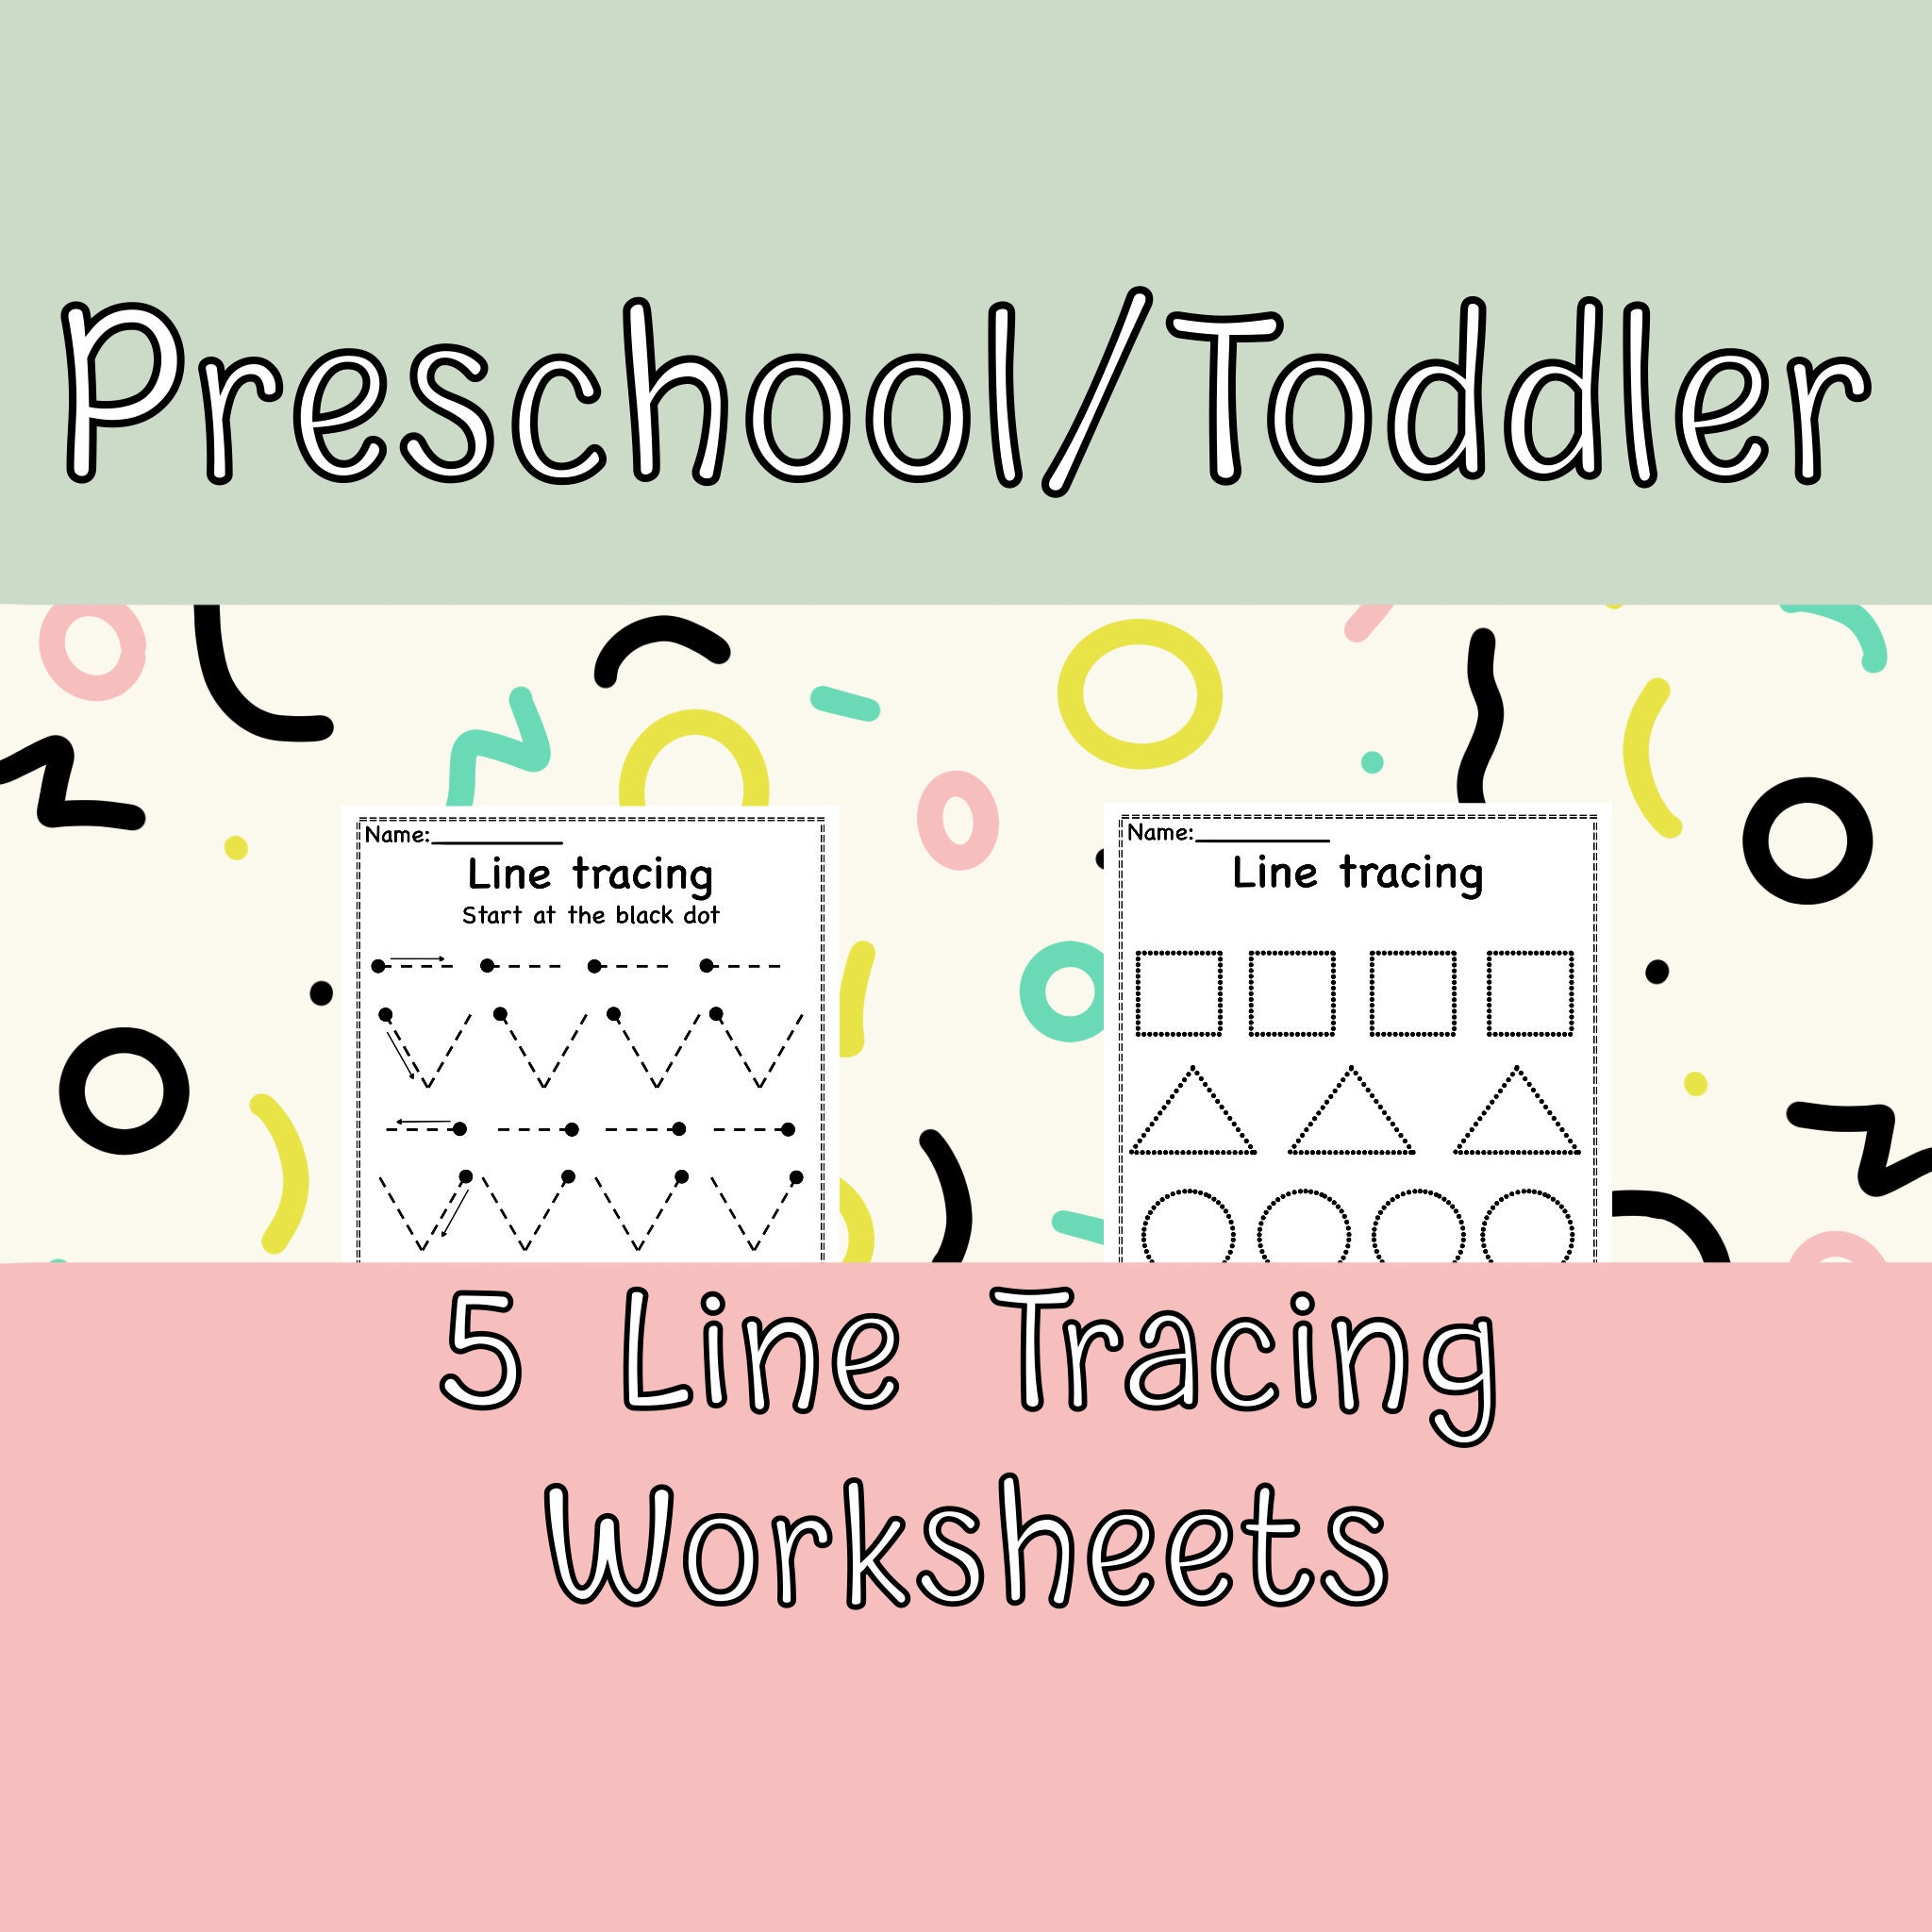 Free And Easy To Print Tracing Lines Worksheets  Paper embroidery,  Preschool activities, Tracing worksheets preschool